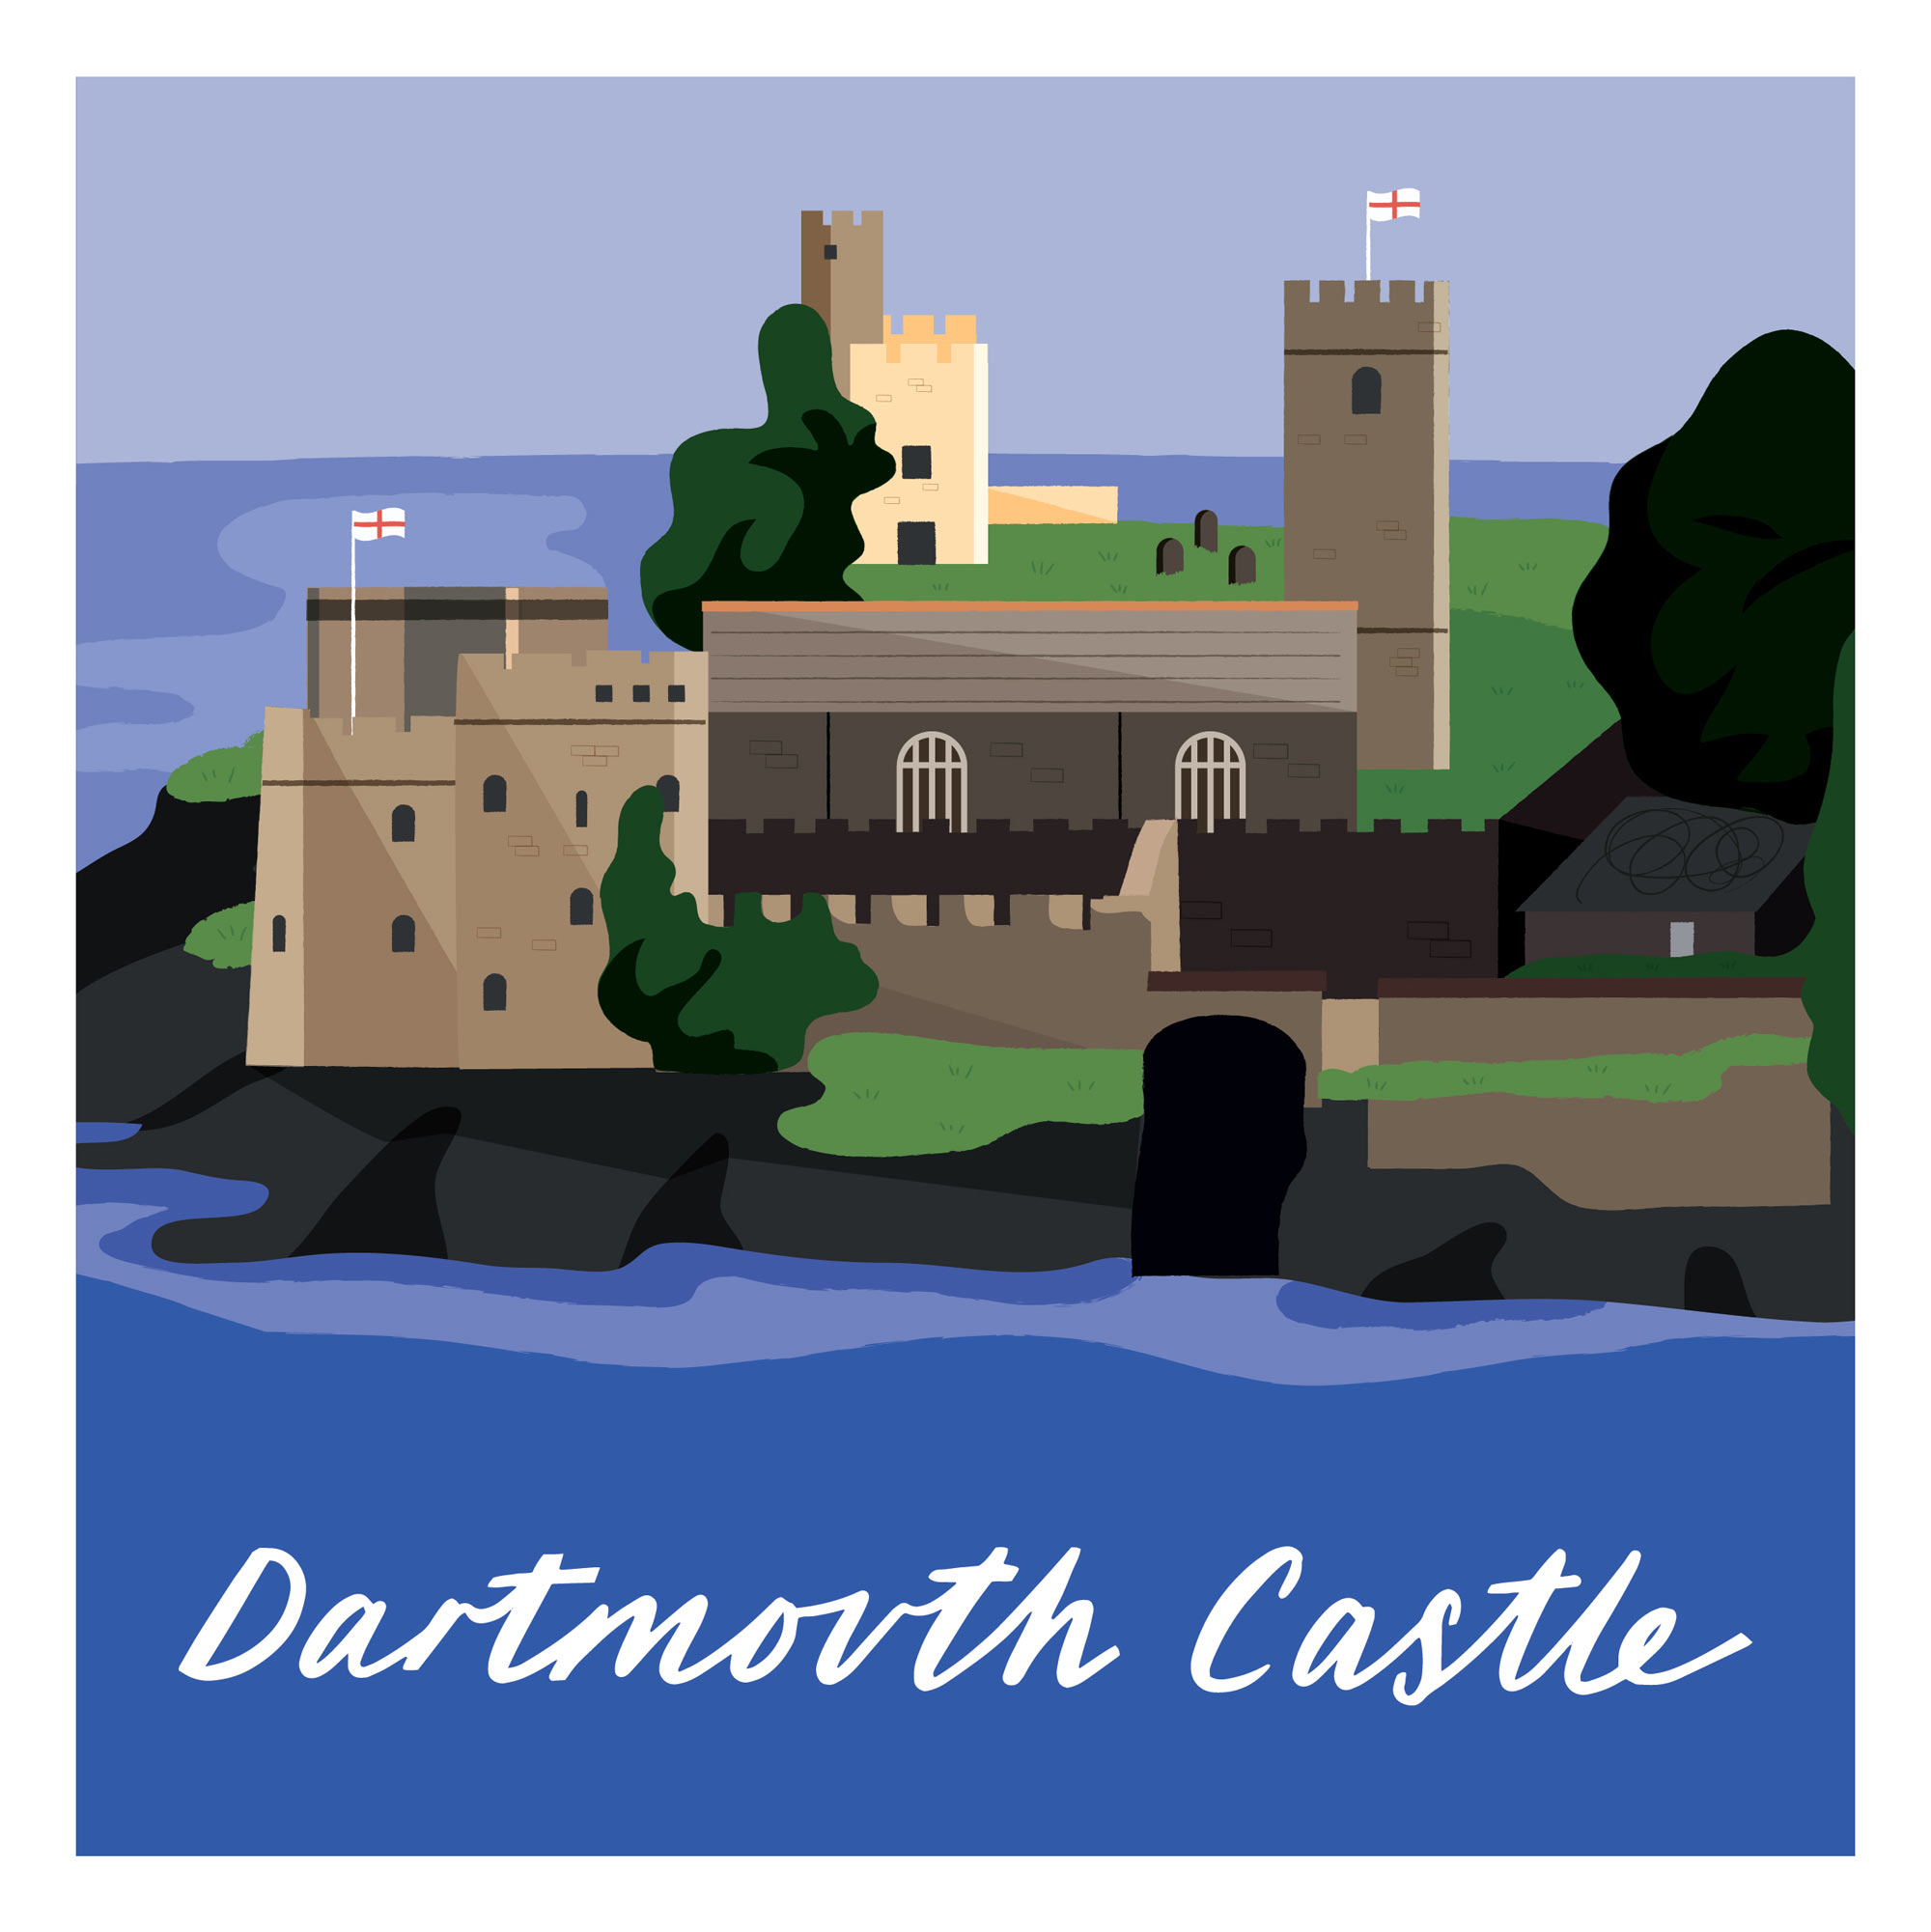 Dartmouth Castle by Elly Jahnz